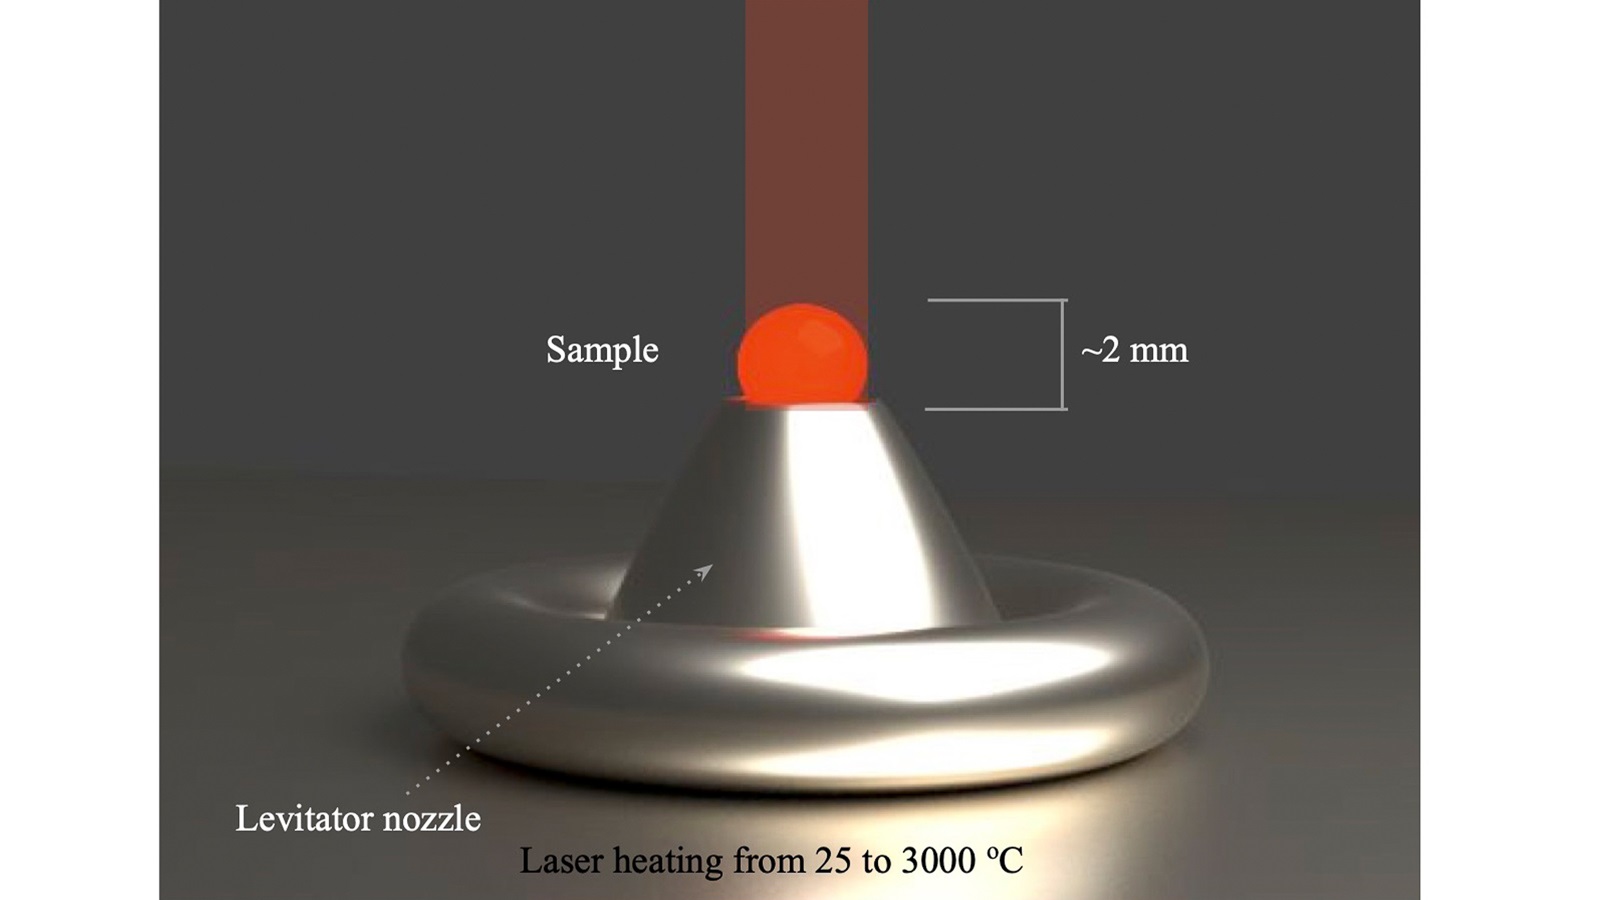 Illustration of the aerodynamic levitation process for studying refractory oxides at their melting points. A small bead of material is buoyed by gas and heated up by an overhead laser before X-rays examine its structure. Image: Ganesh Sivaraman/Argonne National Laboratory.